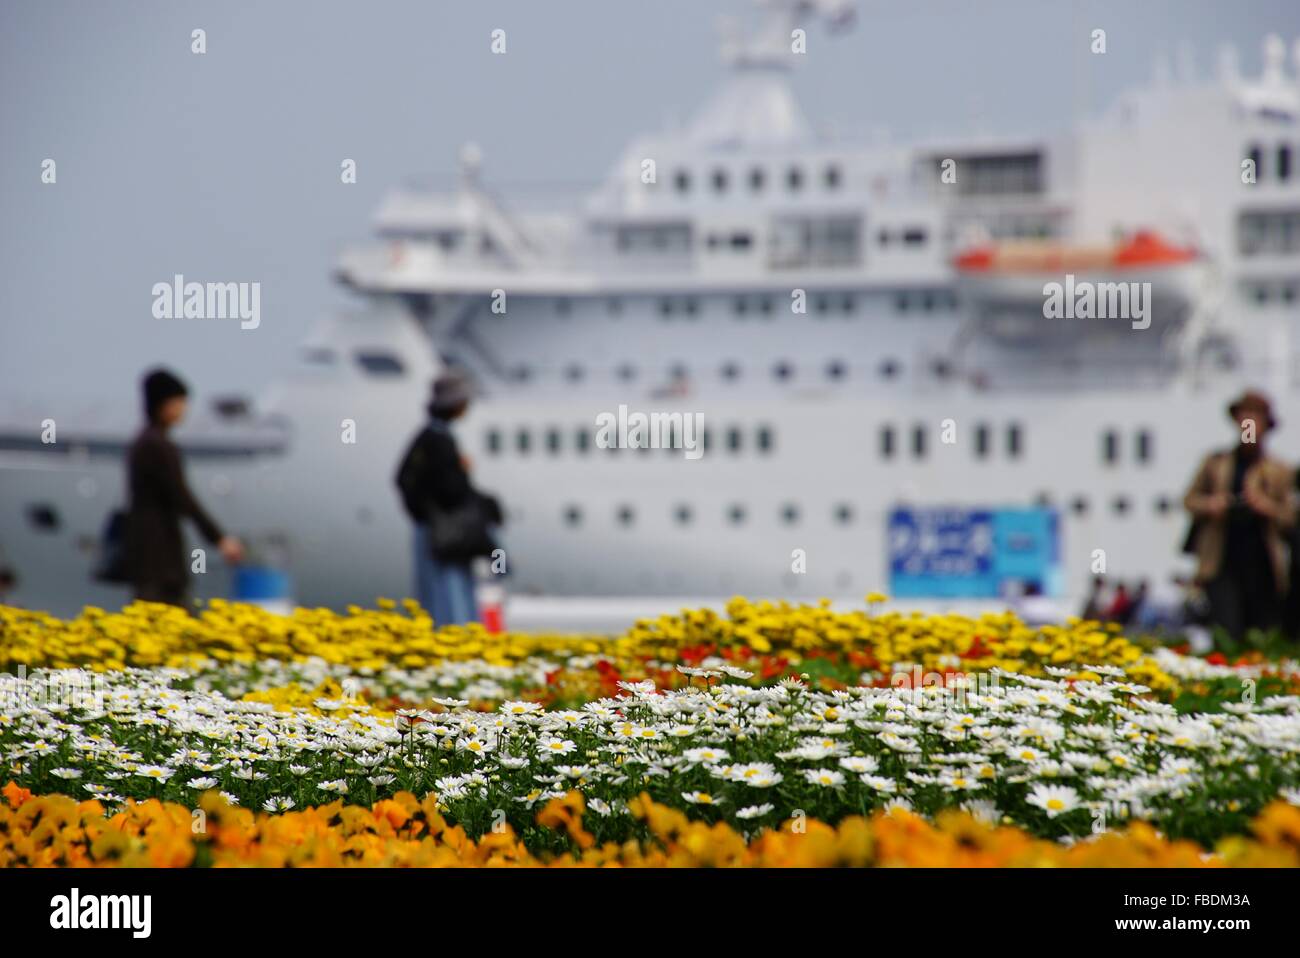 Flower Beds With Cruise Ship In Background Stock Photo